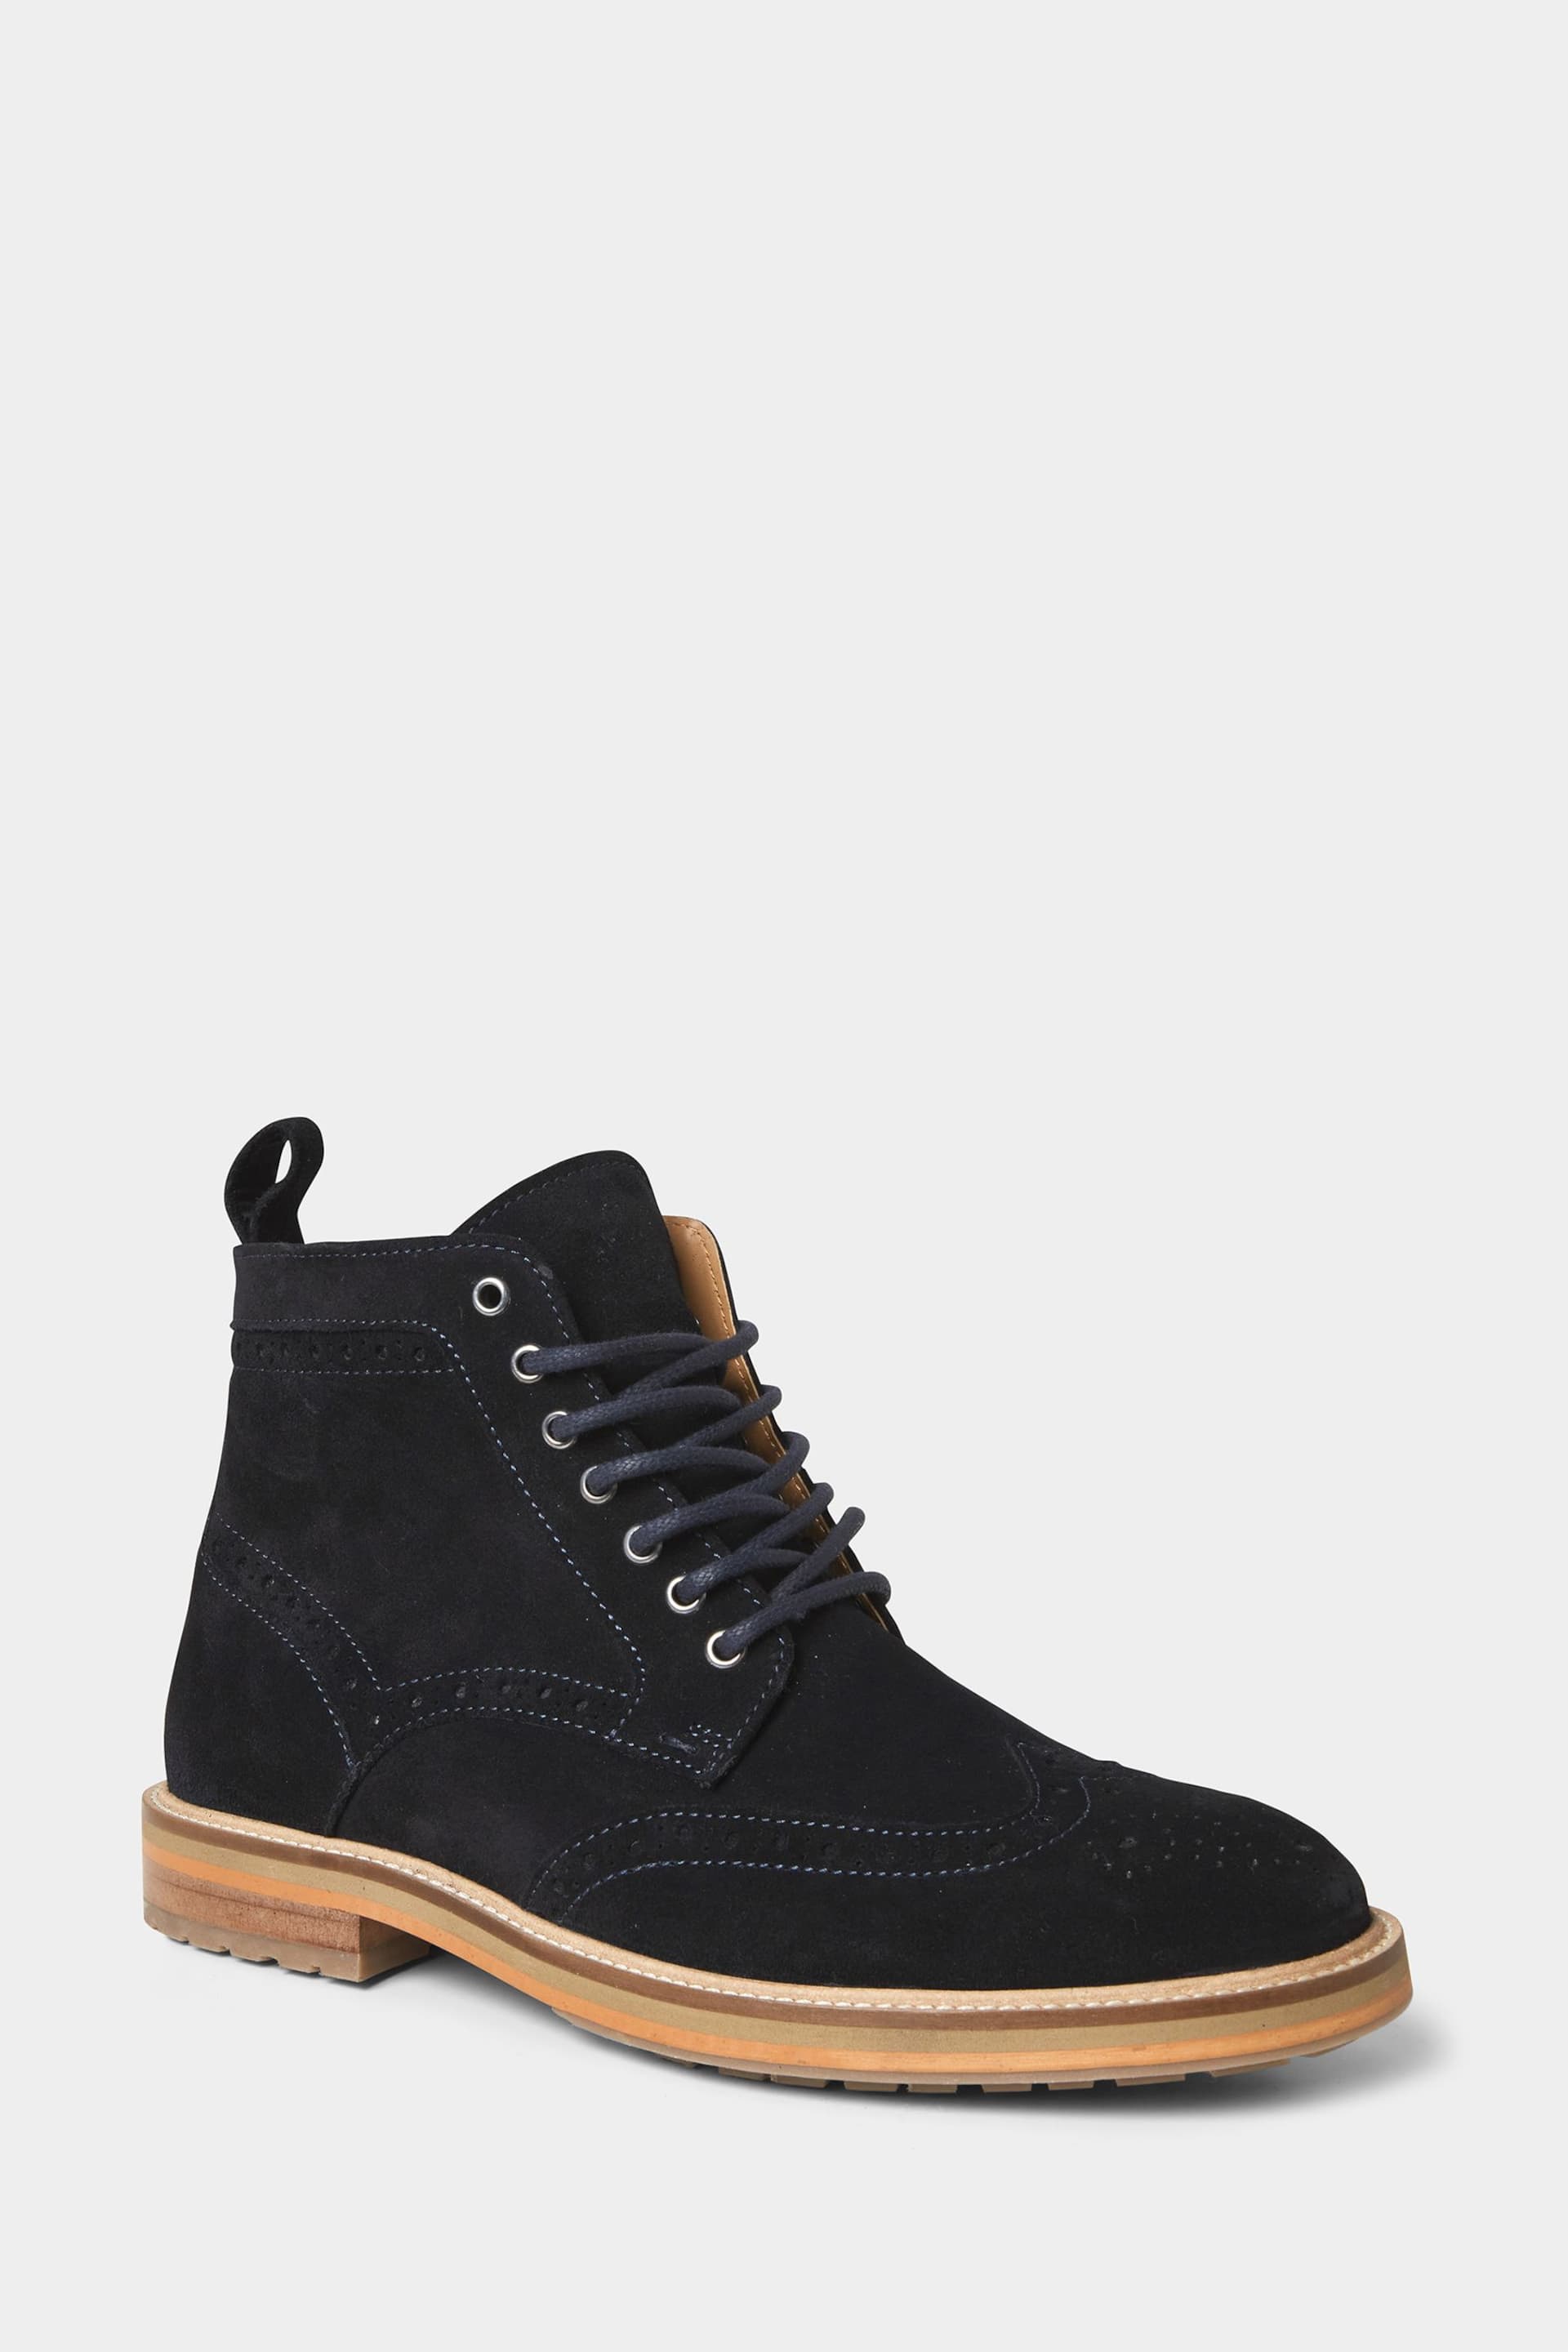 Joe Browns Blue Leith Walk Suede Boots - Image 2 of 5